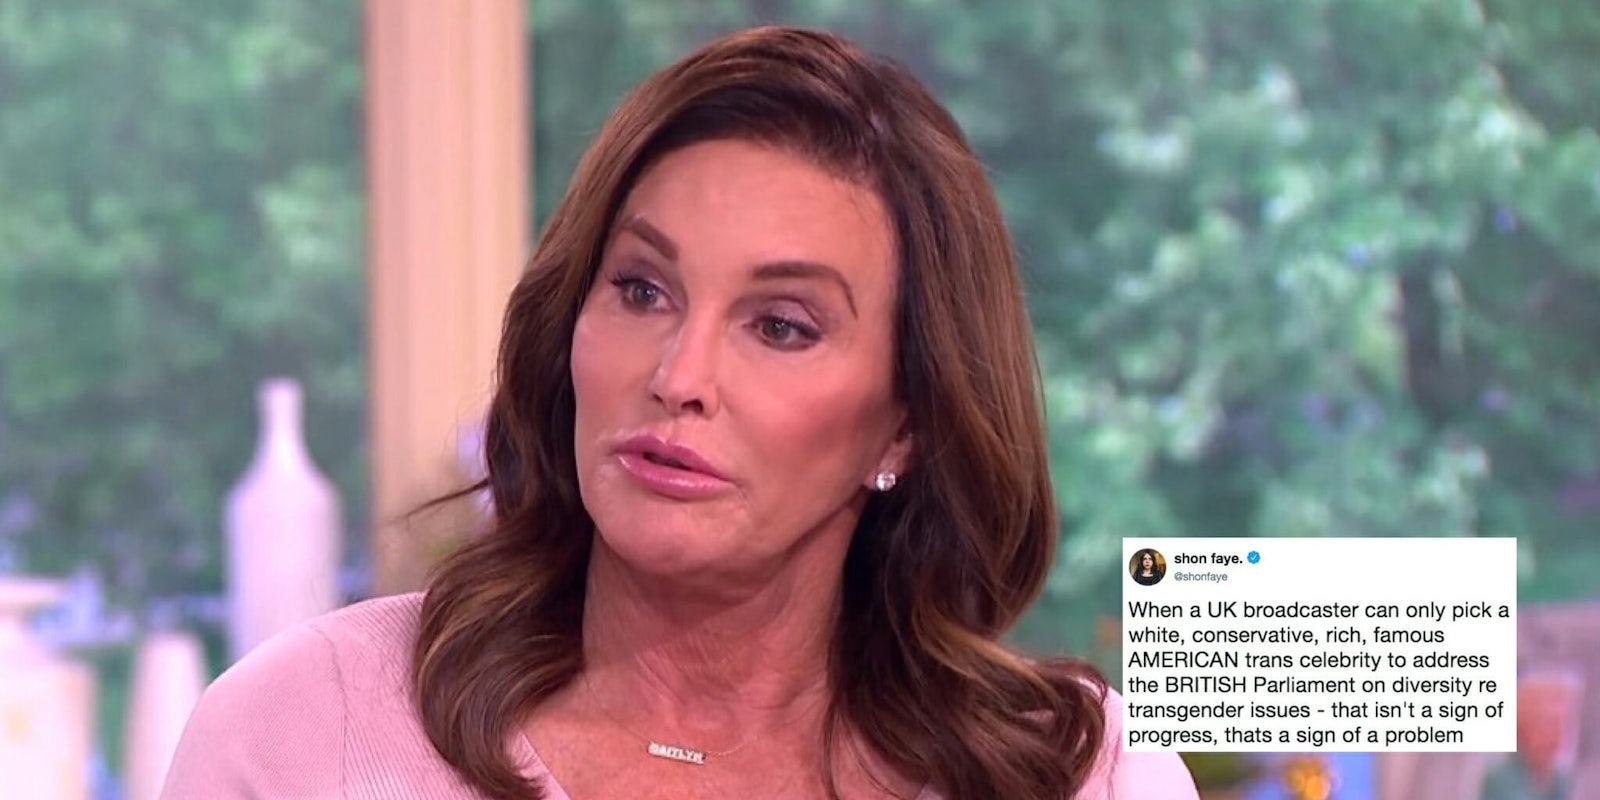 Caitlyn Jenner and a tweet criticizing her addressing The UK's Parliament on diversity.